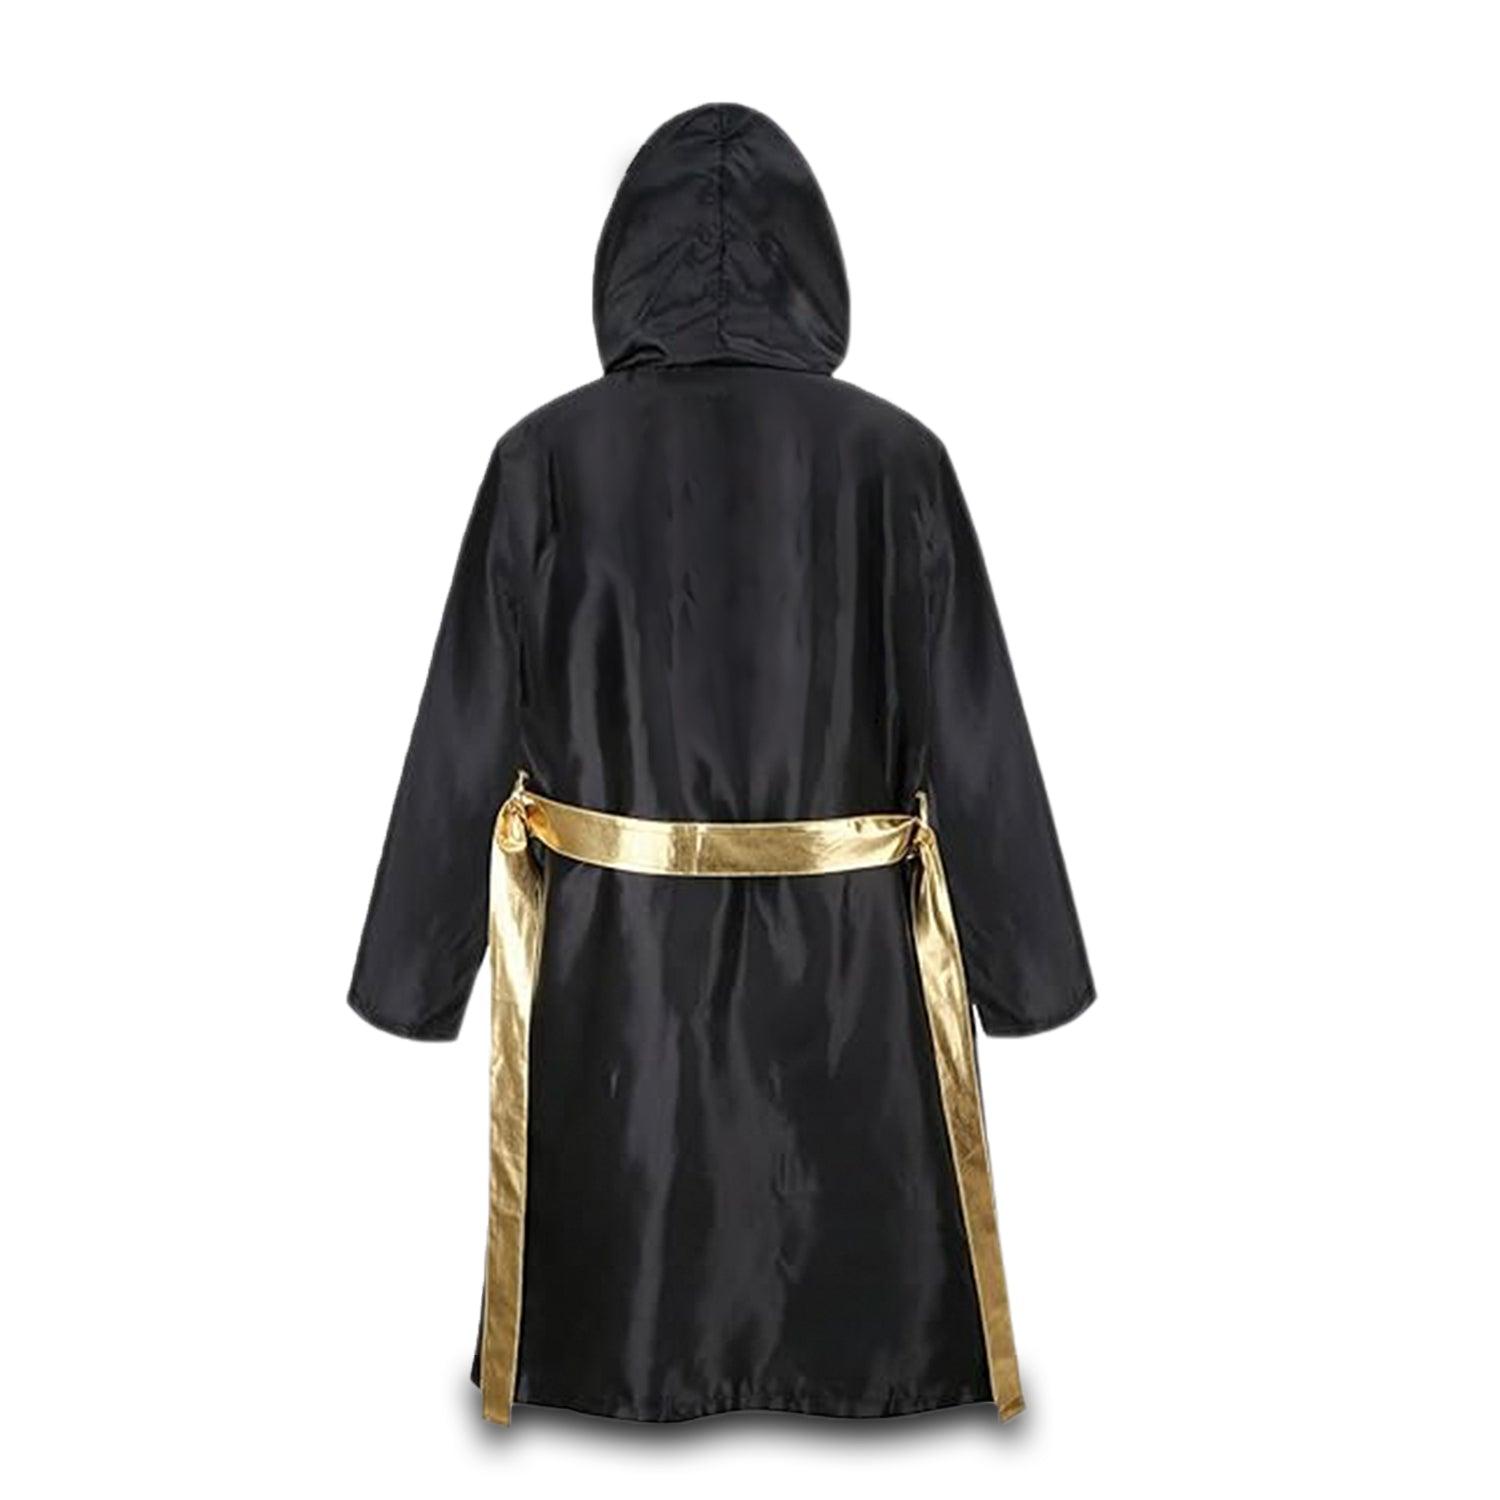 RingMaster Sports Champion Series Kids Boxing Fight Robe Black & Gold Gown Image 3